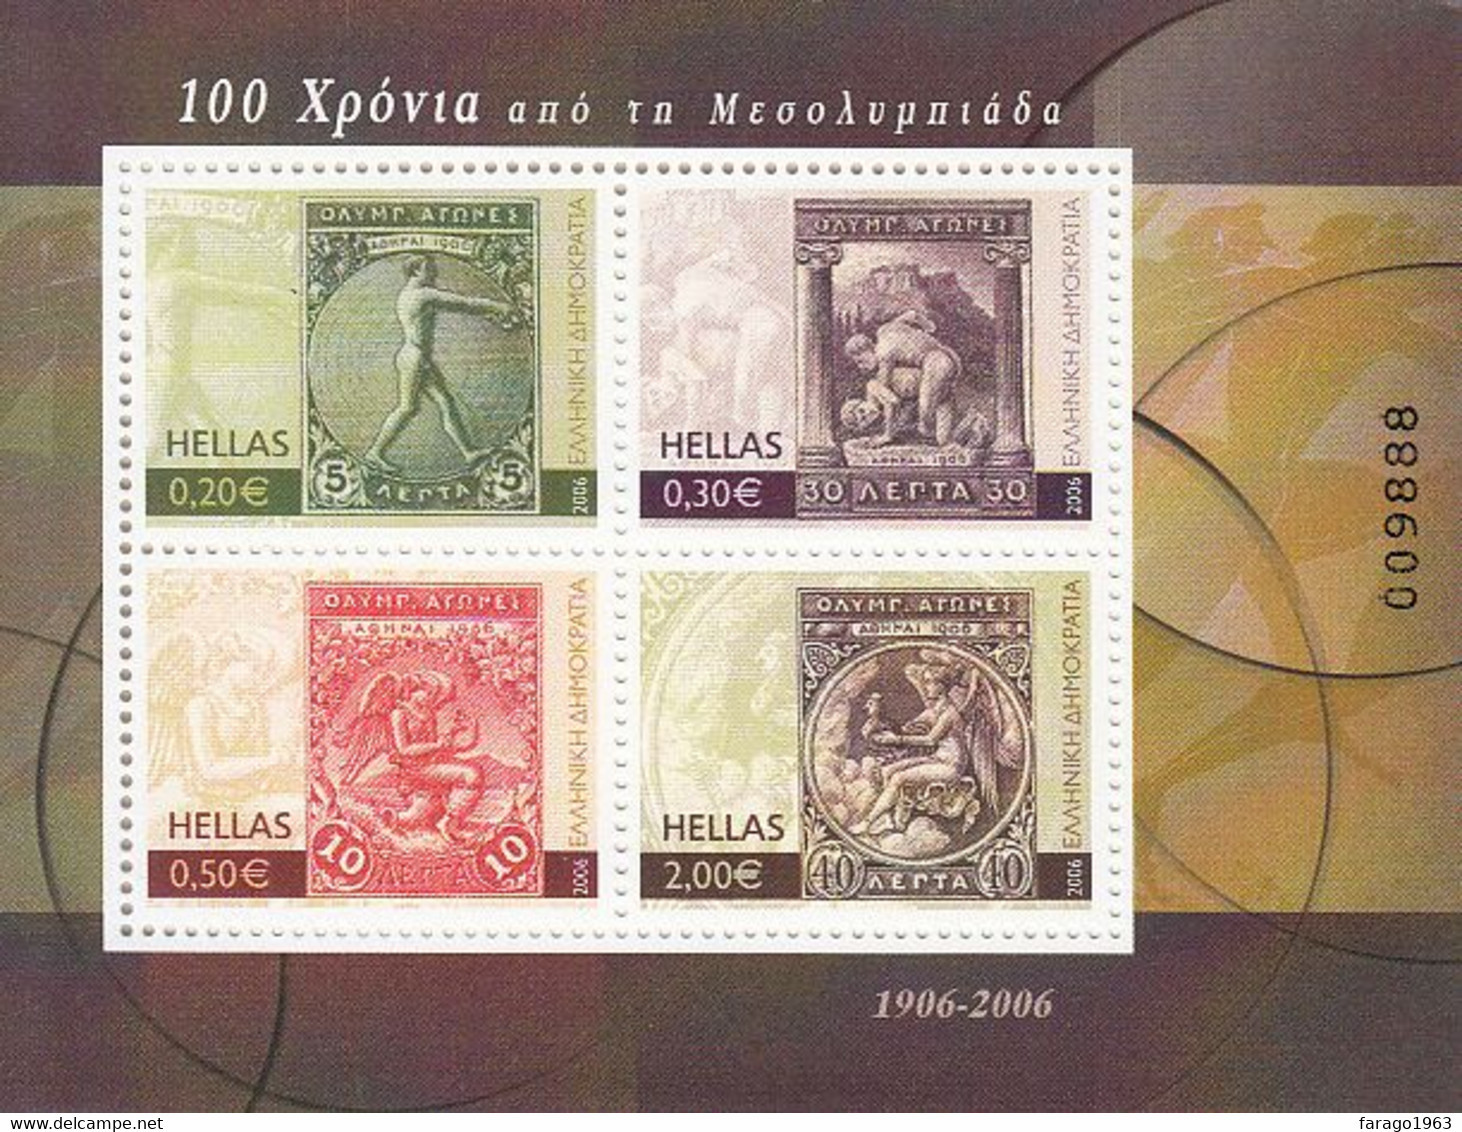 2006 Greece Olympic Stamps On Stamps Complete Set Of 2 Souvenir Sheets MNH @ Below Face Value - Unused Stamps